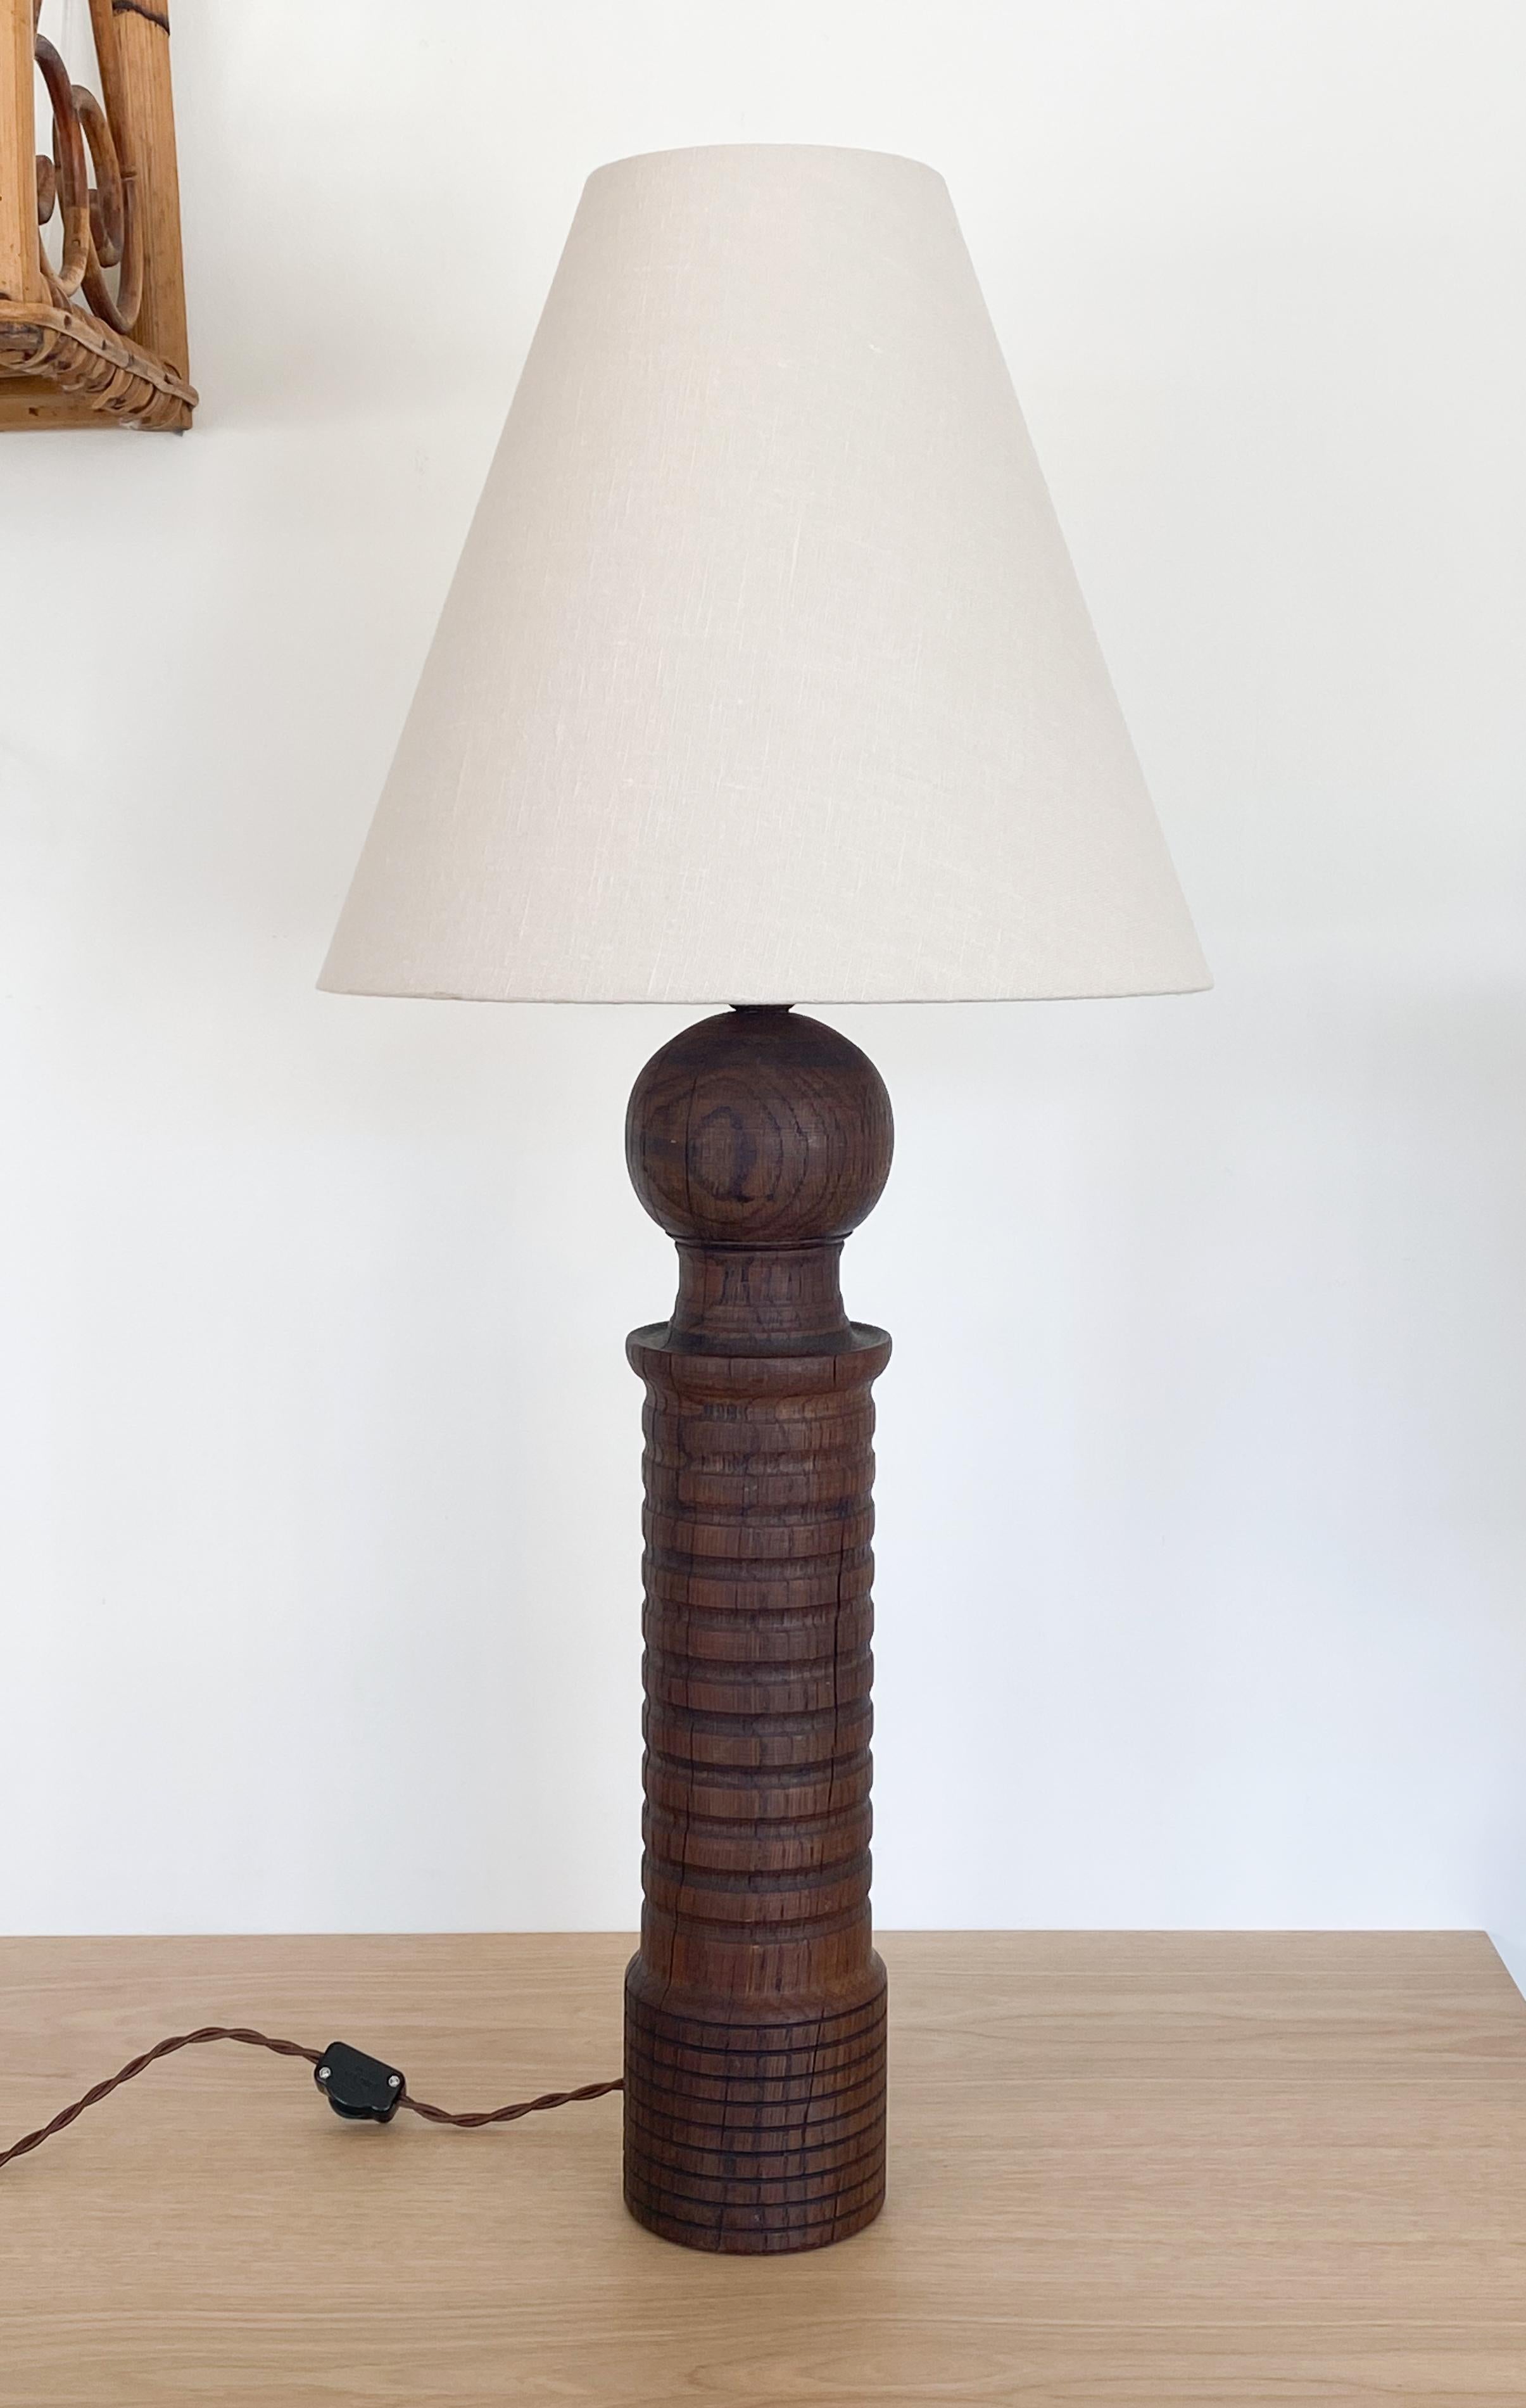 Vintage tall carved wood lamp with linen shade from France. Original wood finish and newly rewired. 

Measures: Shade diameter 13.25